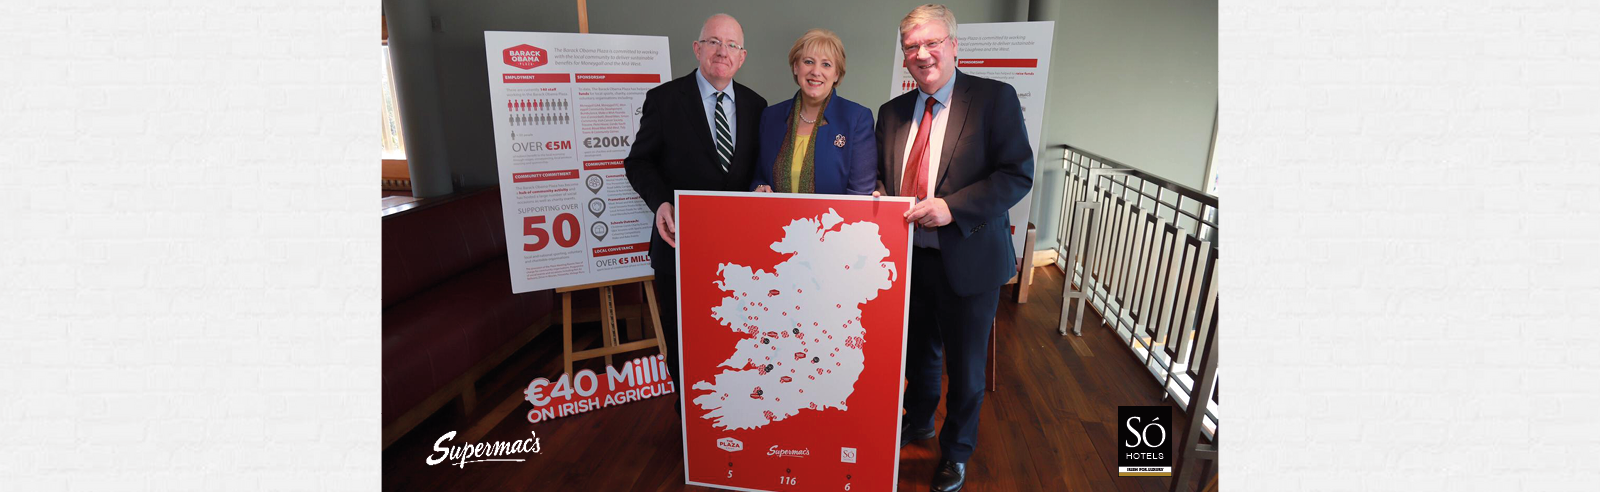 300 New Jobs Created by the Supermacâs and SÃ Hotels Groups